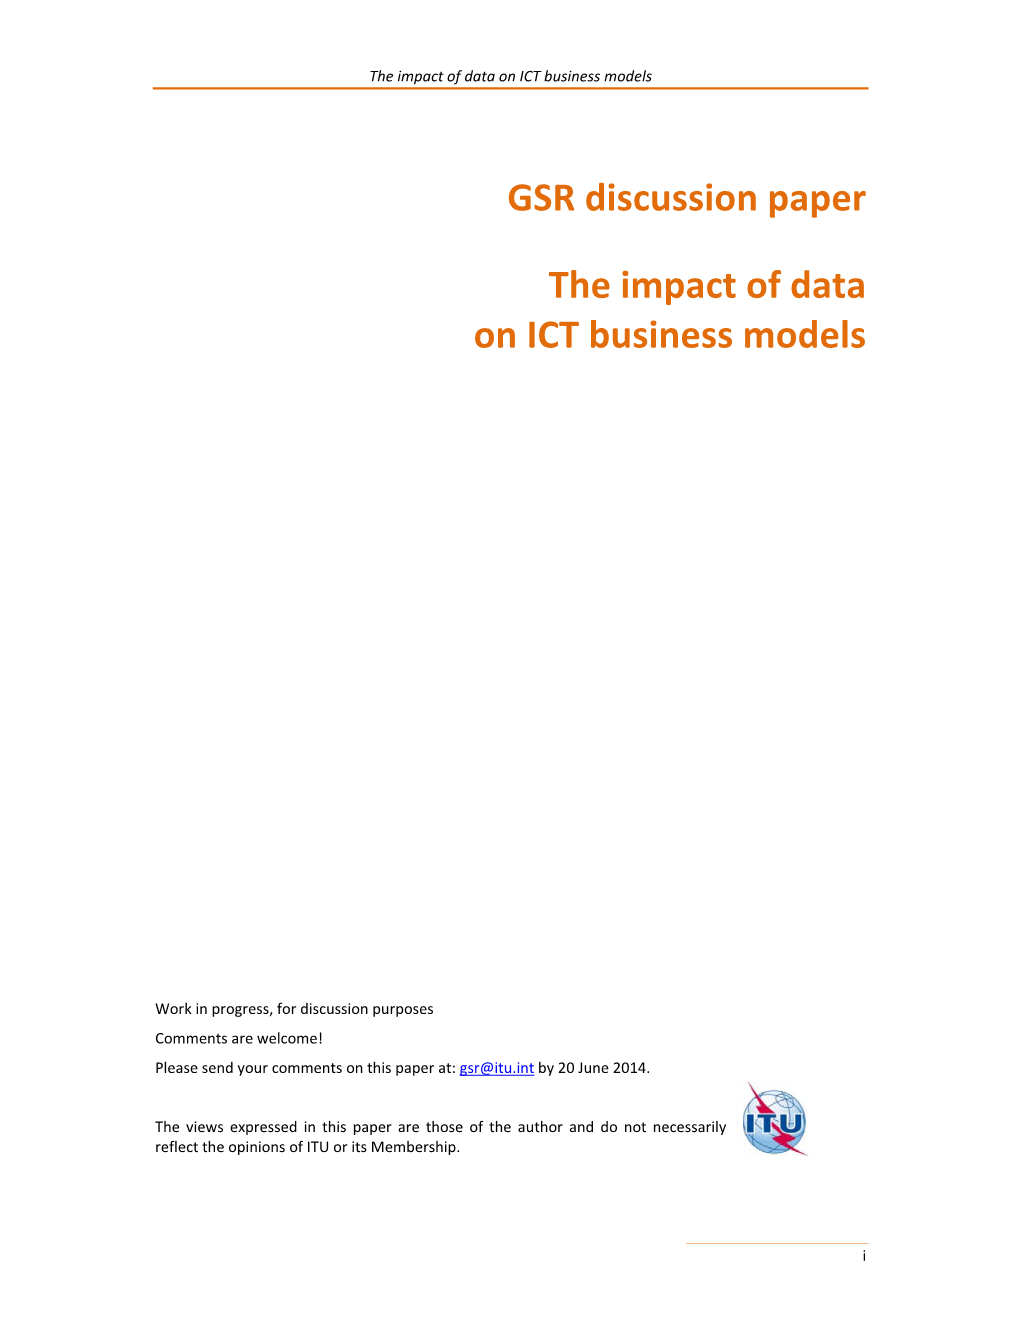 GSR Discussion Paper the Impact of Data on ICT Business Models